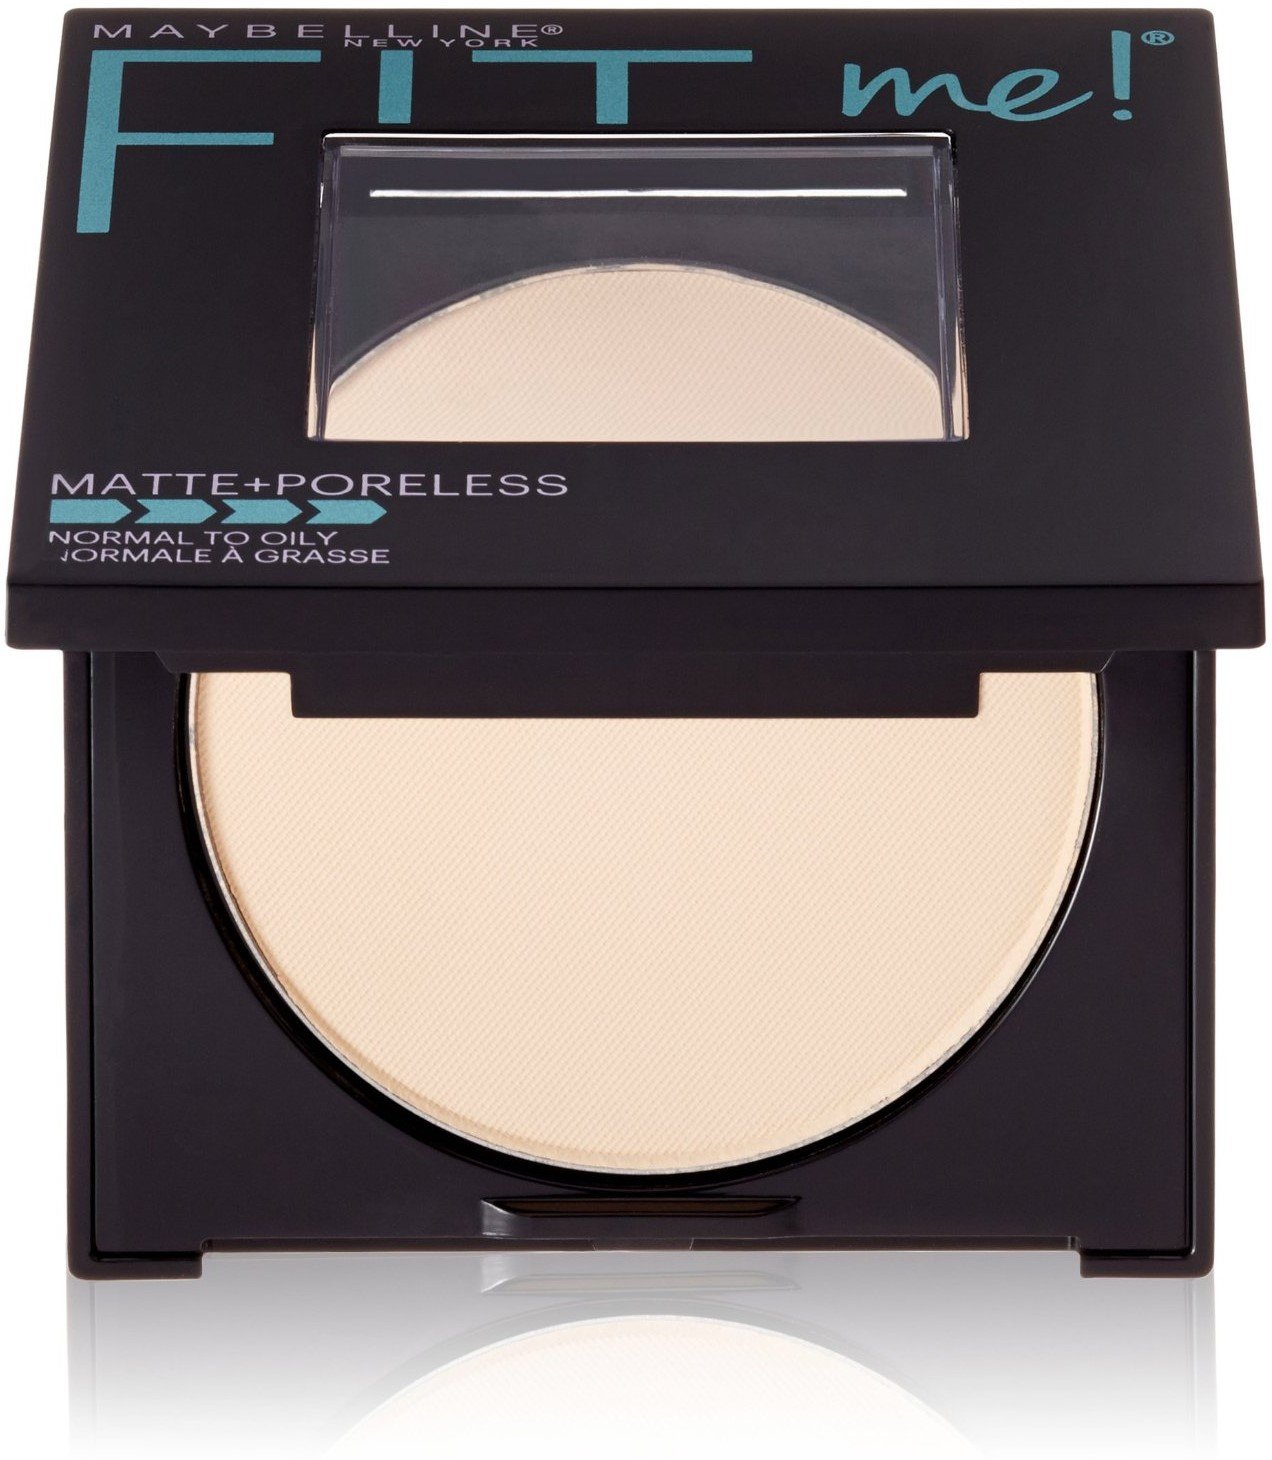 Maybelline New York Fit Me Matte + Poreless Pressed Face Powder Makeup & Setting Powder, Translucent, 1 Count